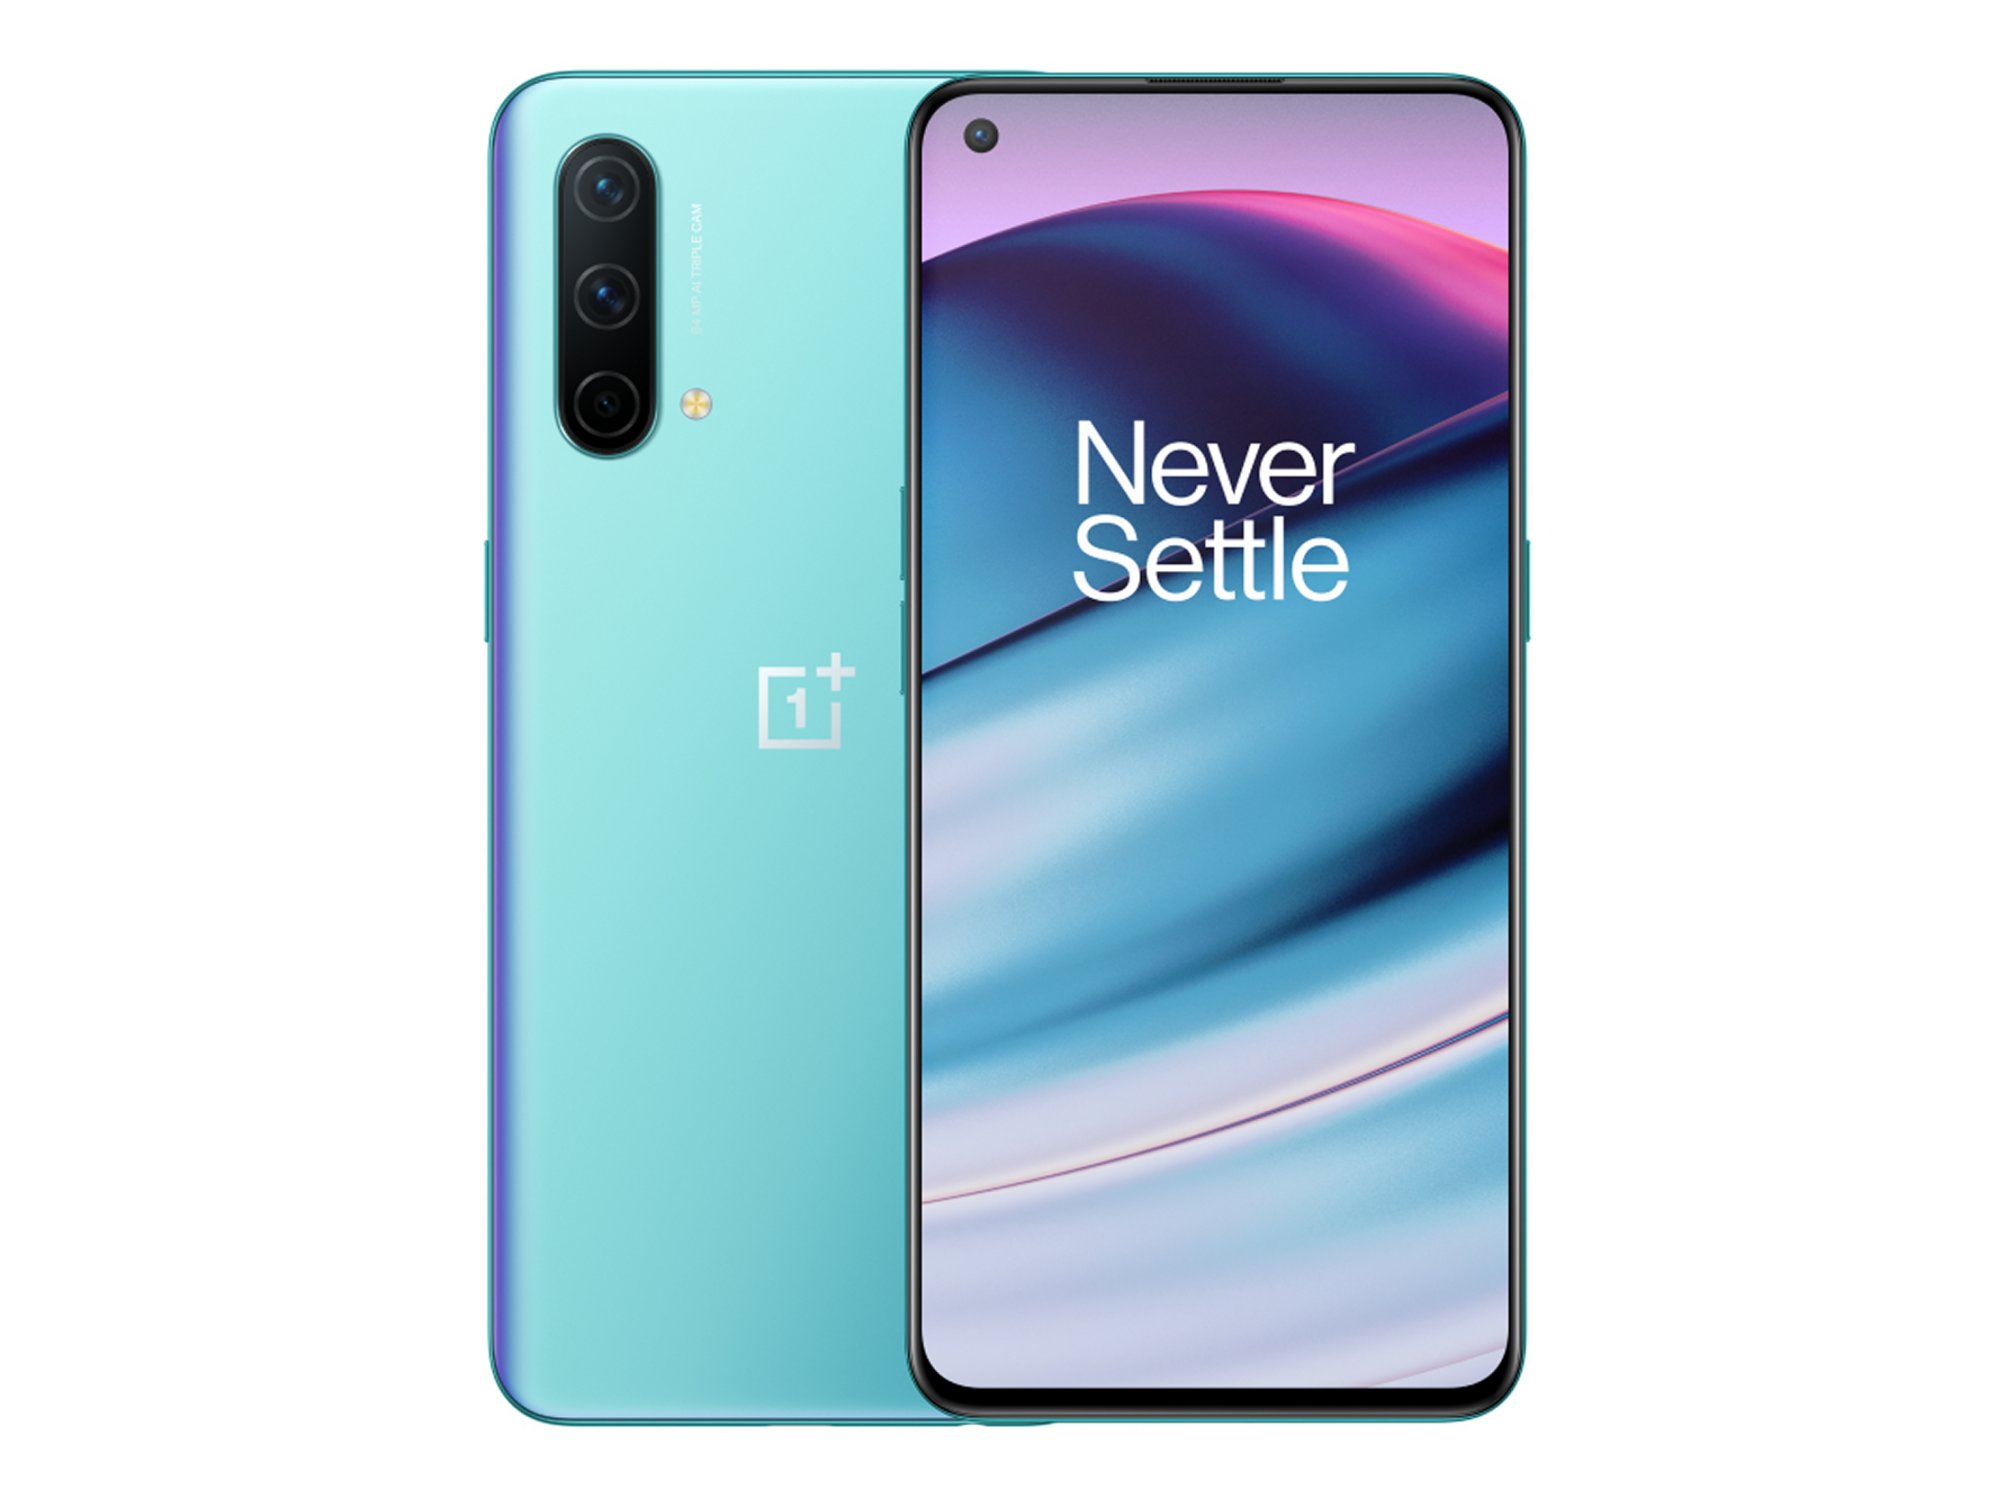 Oneplus Nord Ce 5g Smartphone Review Focused On The Essentials Notebookcheck Net Reviews